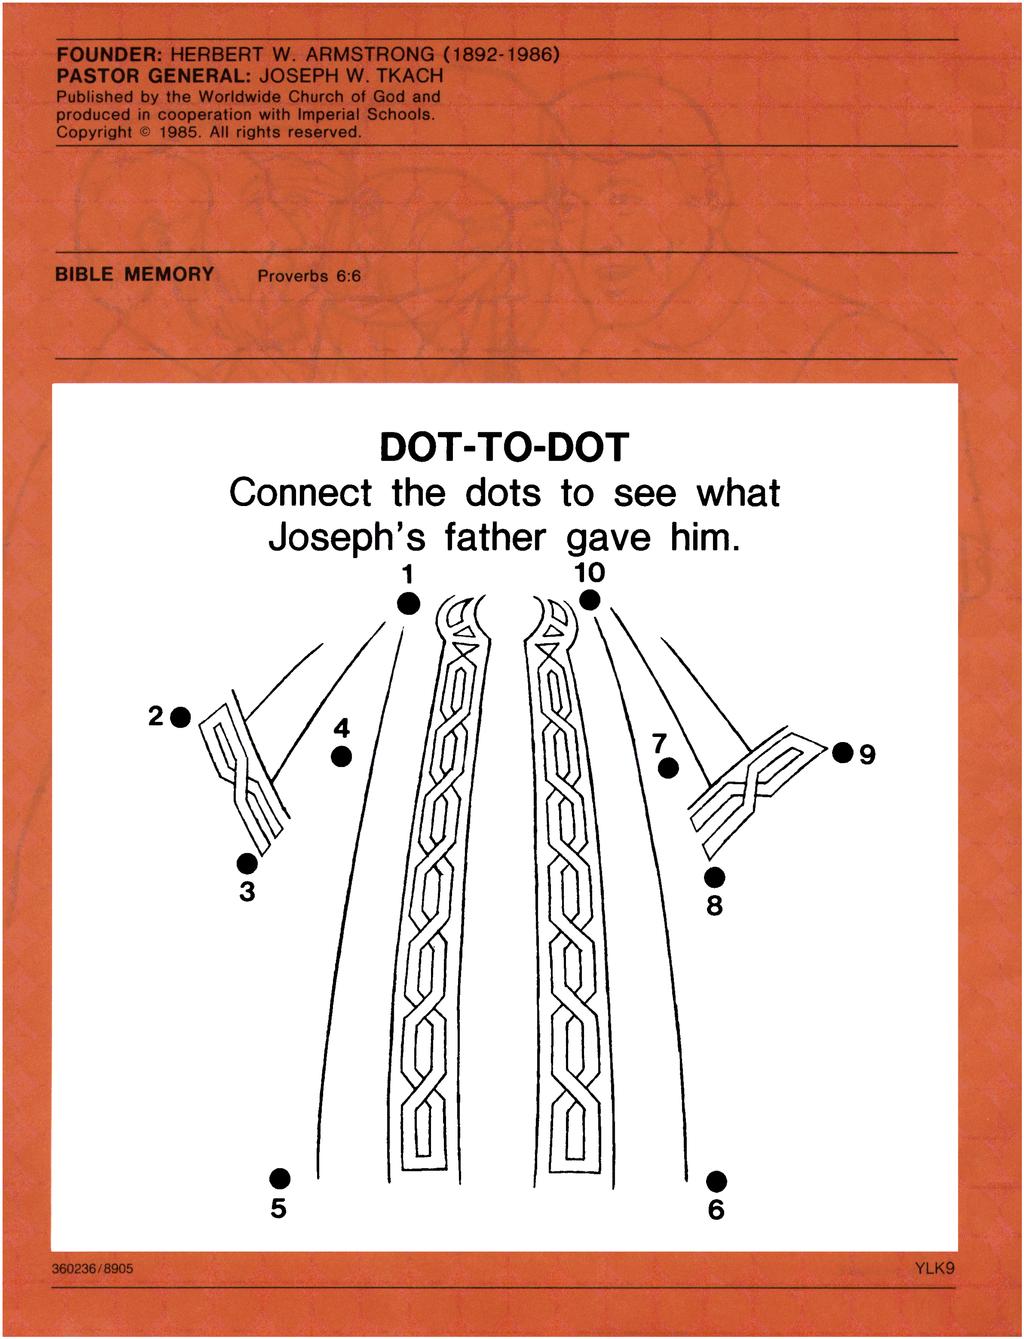 DOT-TO-DOT Connect the dots to see what